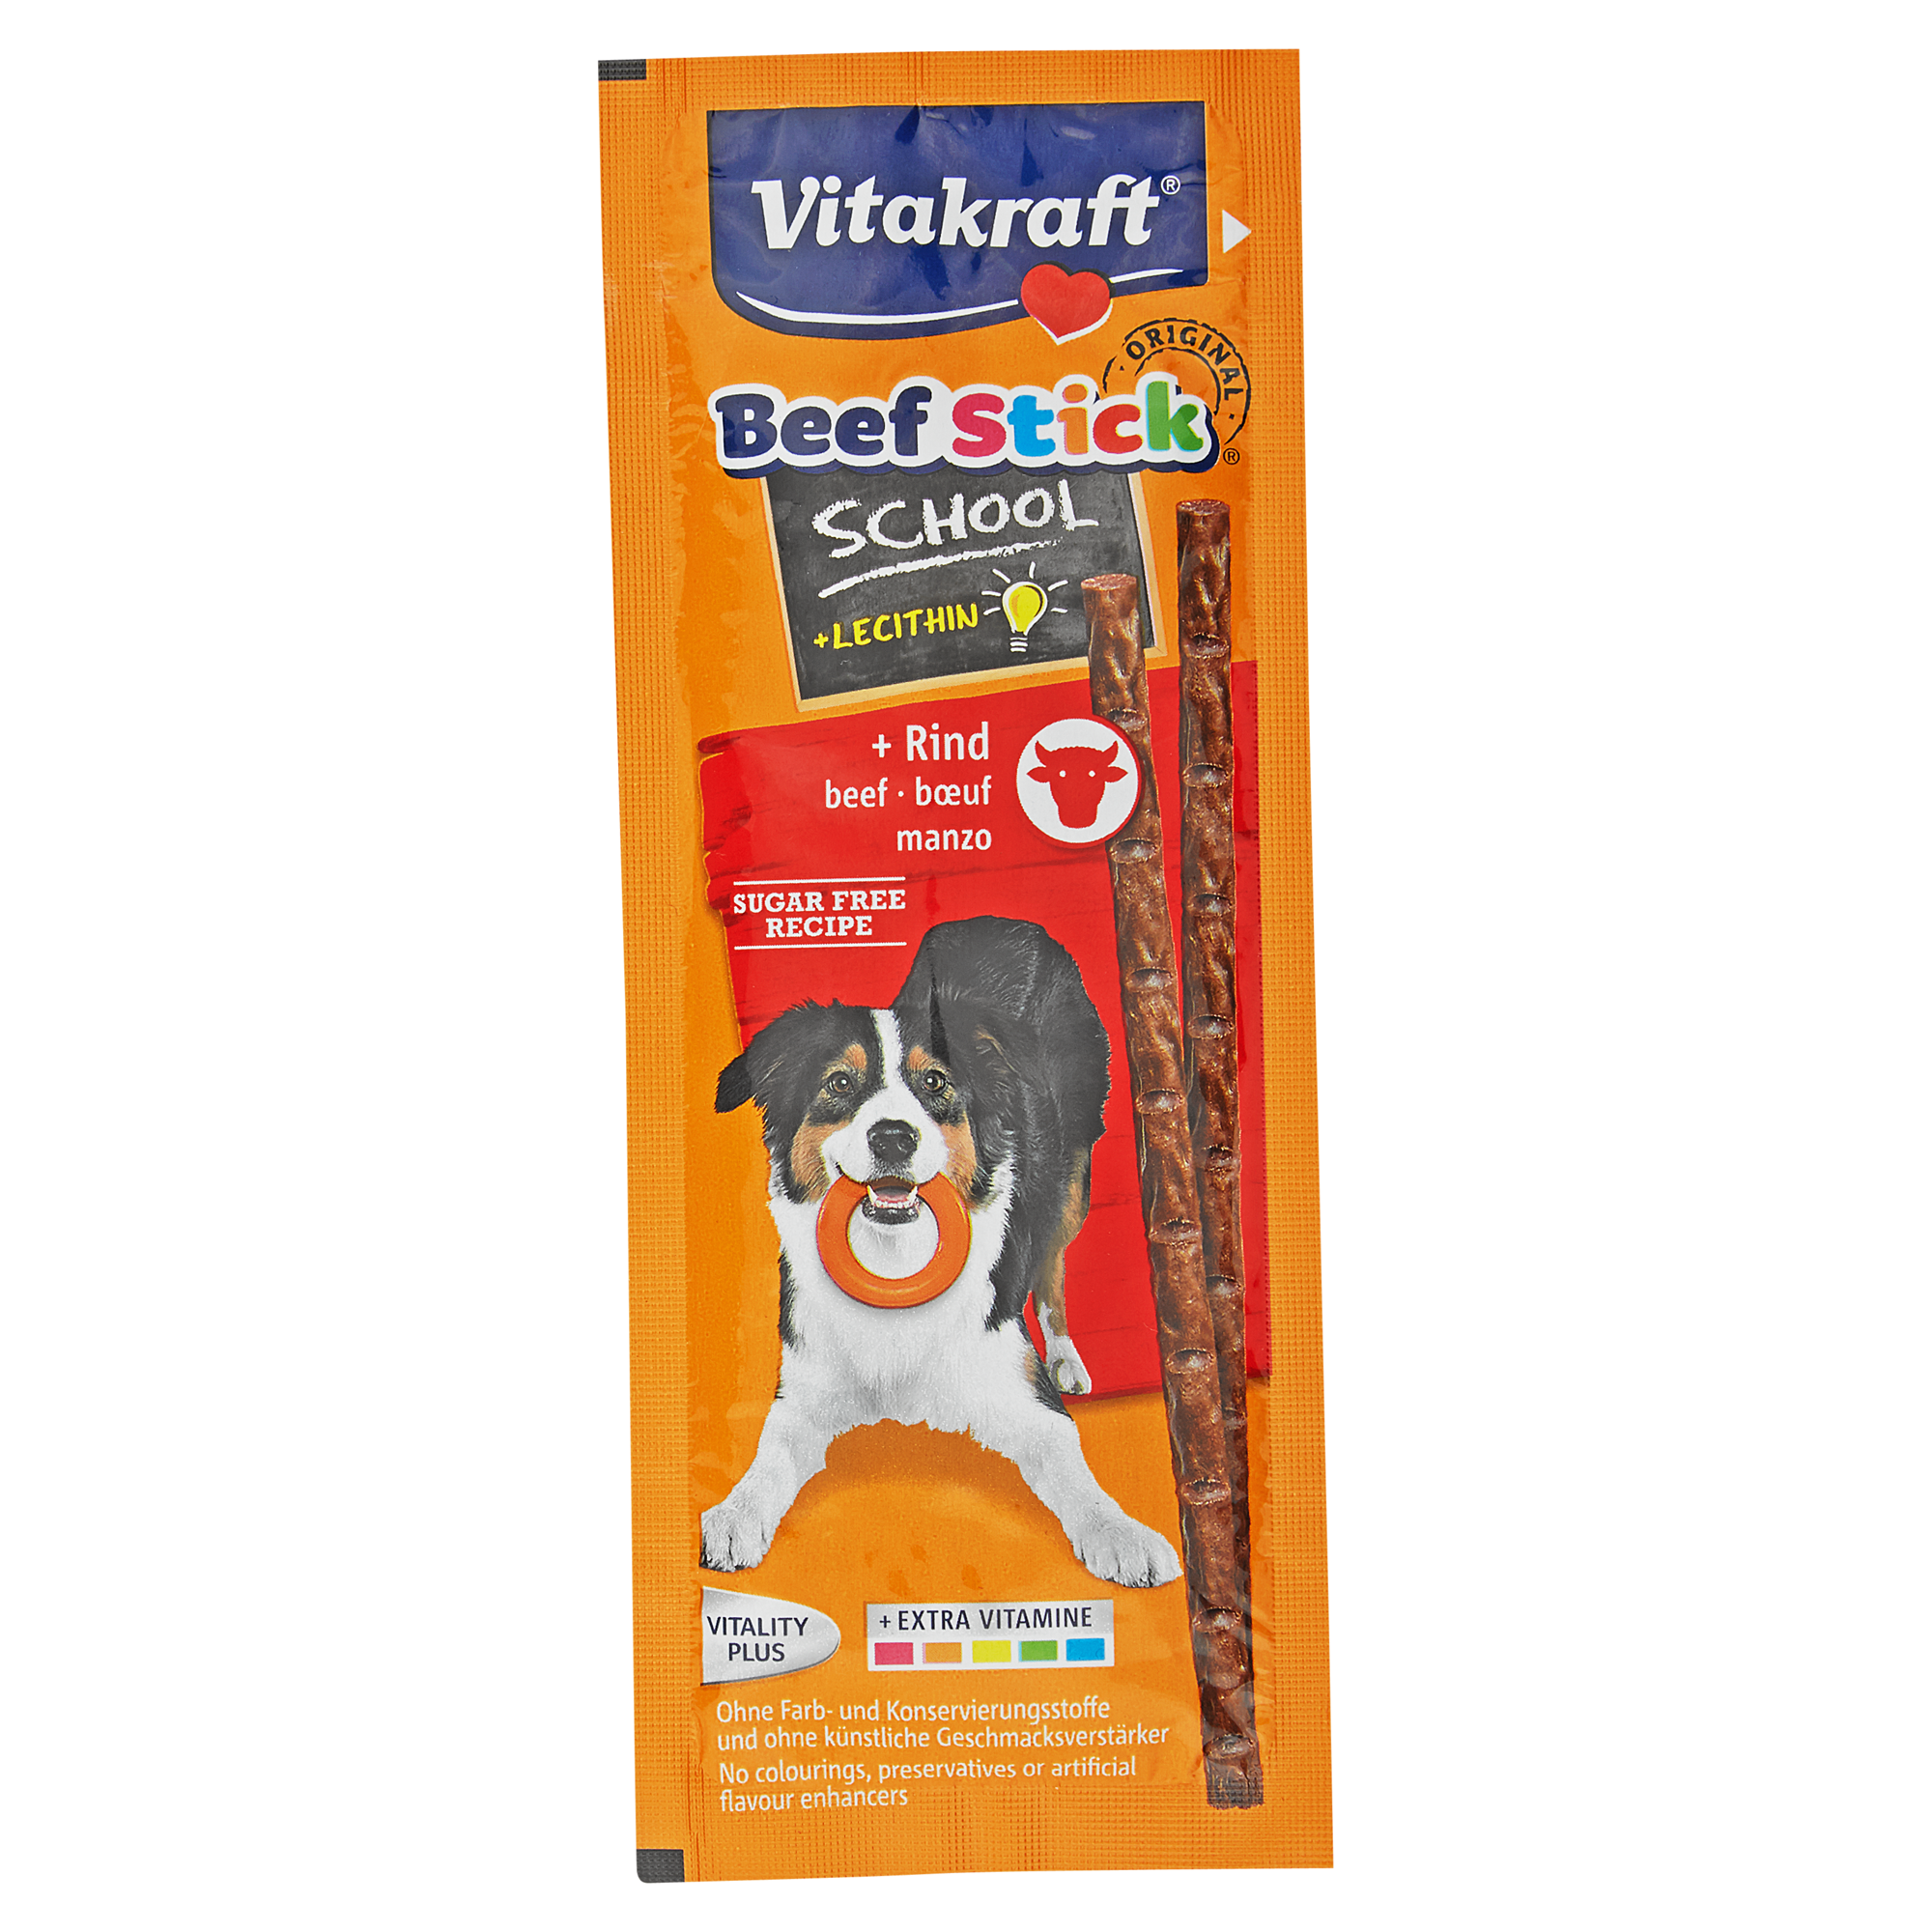 Hundesnack "Beef Stick" School mit Rind 10 Stück + product picture